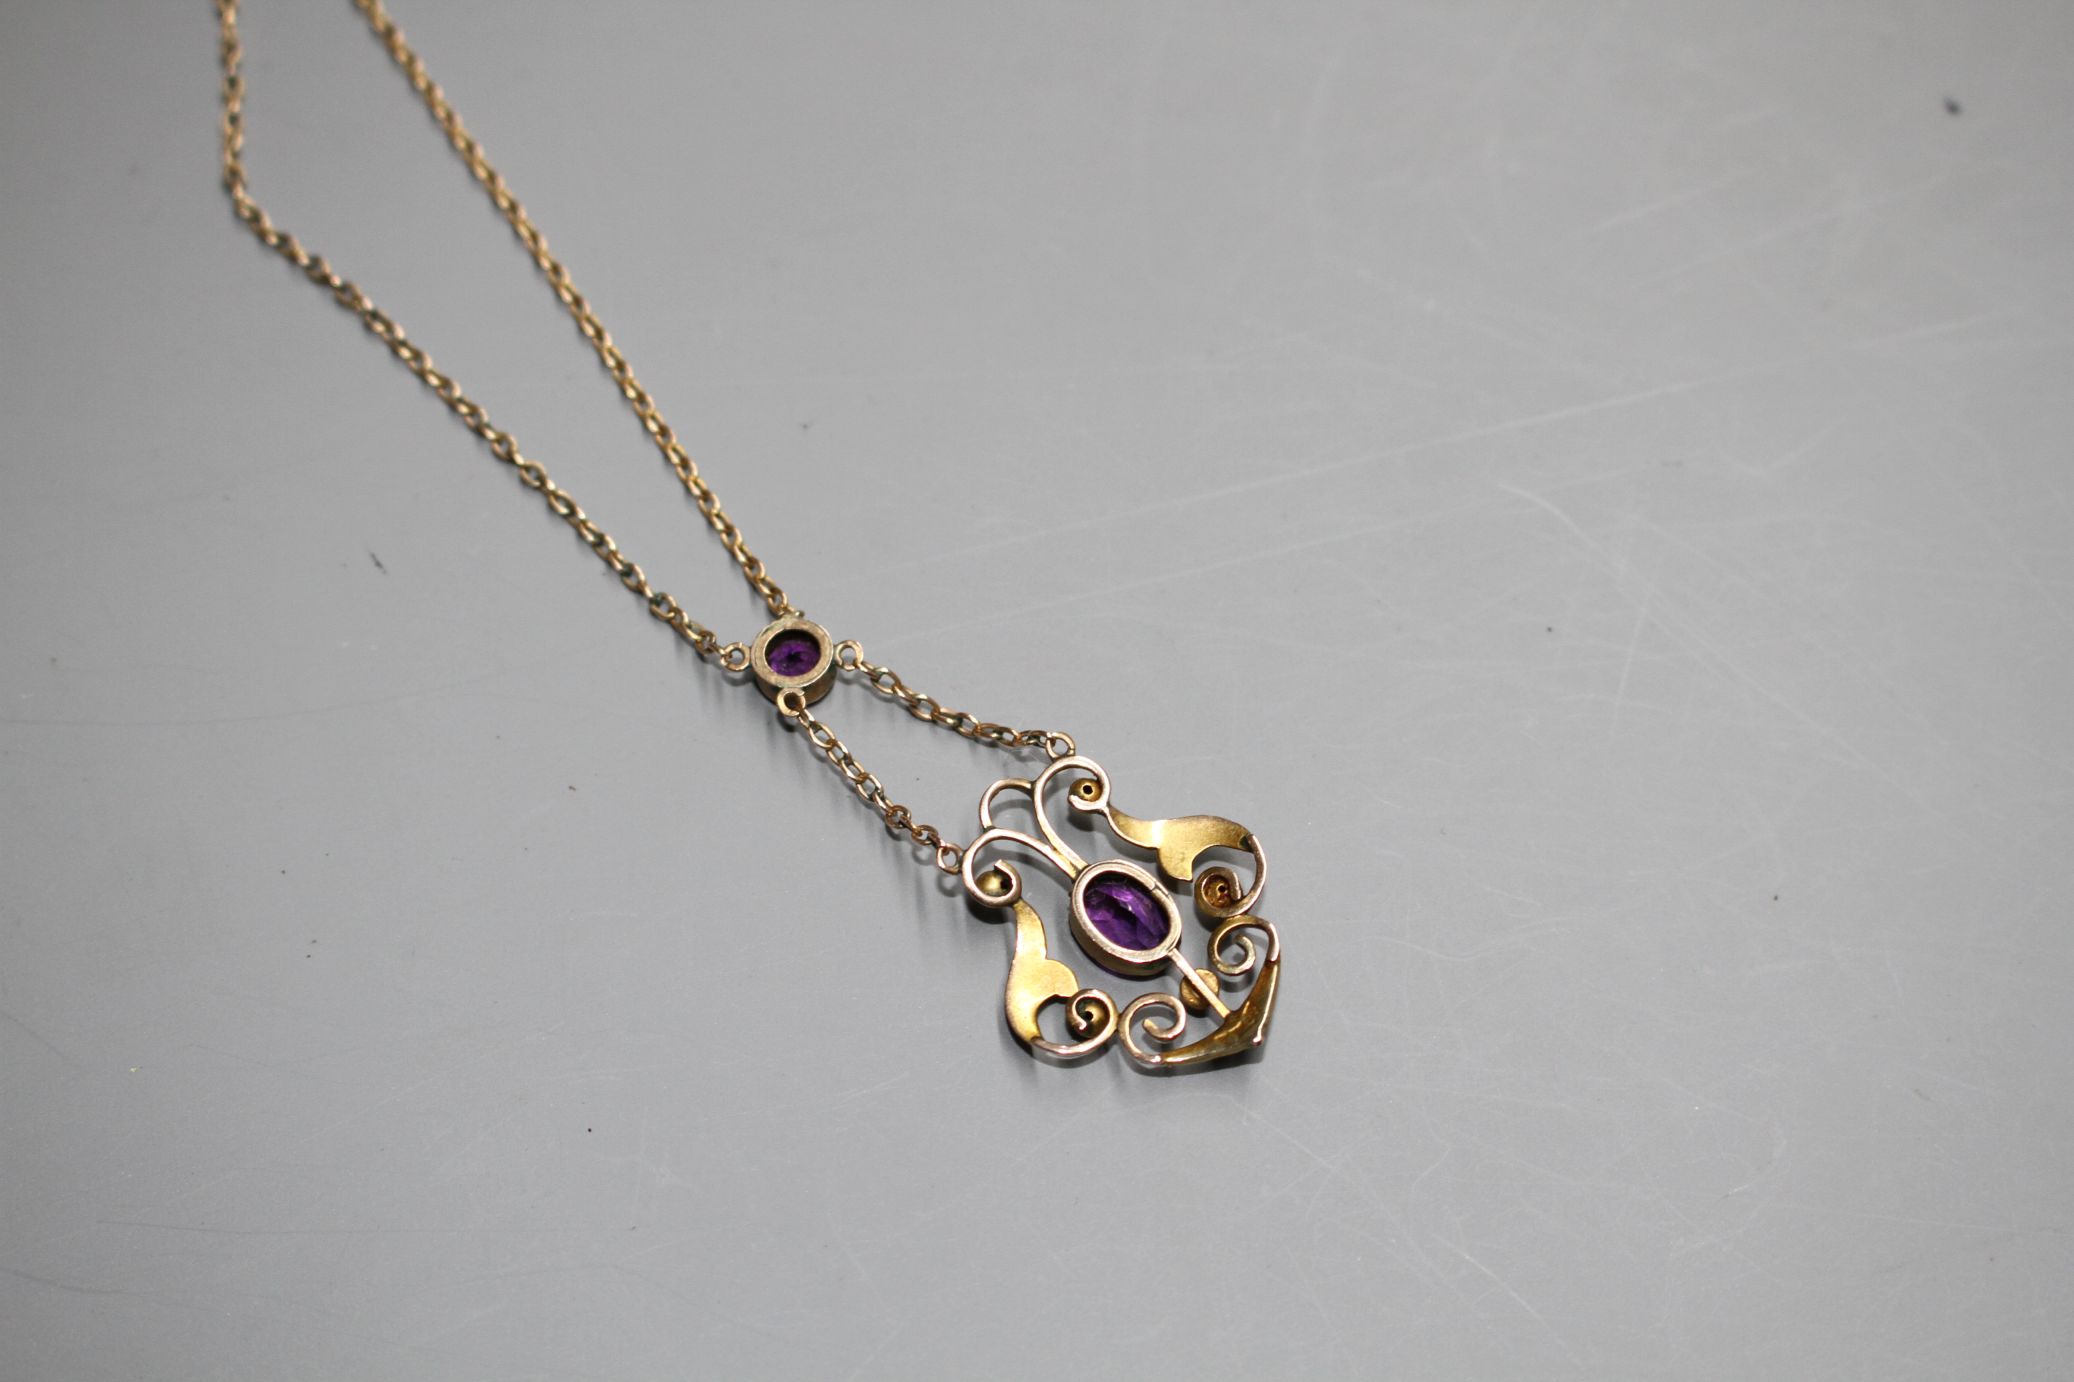 An Edwardian 9ct, amethyst and seed pearl set pendant necklace, pendant lower section 25mm. - Image 3 of 4